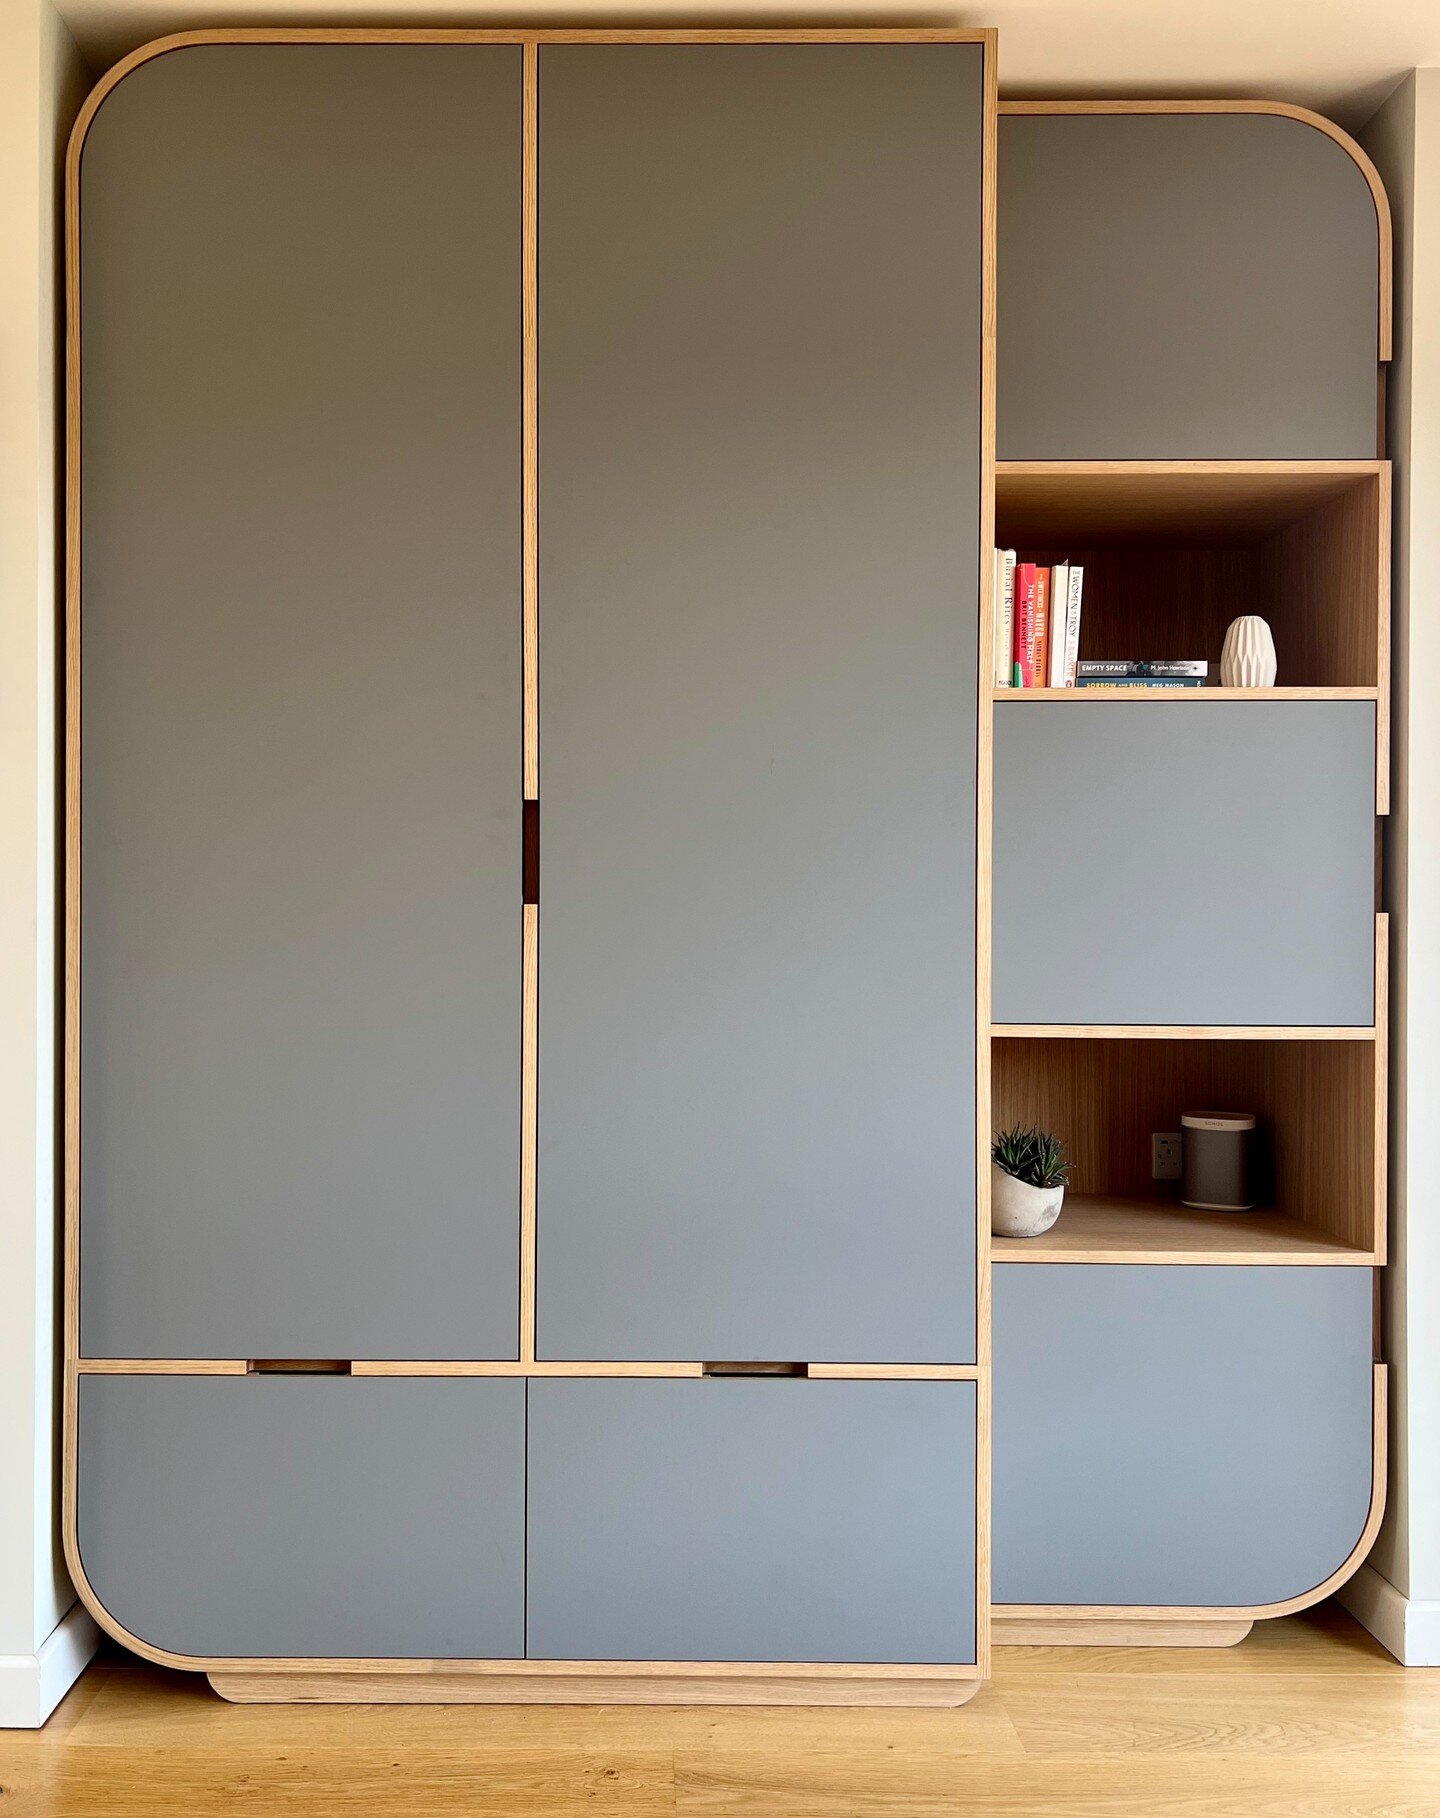 𝐋𝐞𝐢𝐠𝐡𝐭𝐨𝐧 𝐑𝐝. 
Curves! Curves, easy to design but not so easy to build, especially curved cabinets but we got there and the results are so satisfying. Oak and grey Fenix working well together for this wardrobe. 

#furniture #interiordesign #